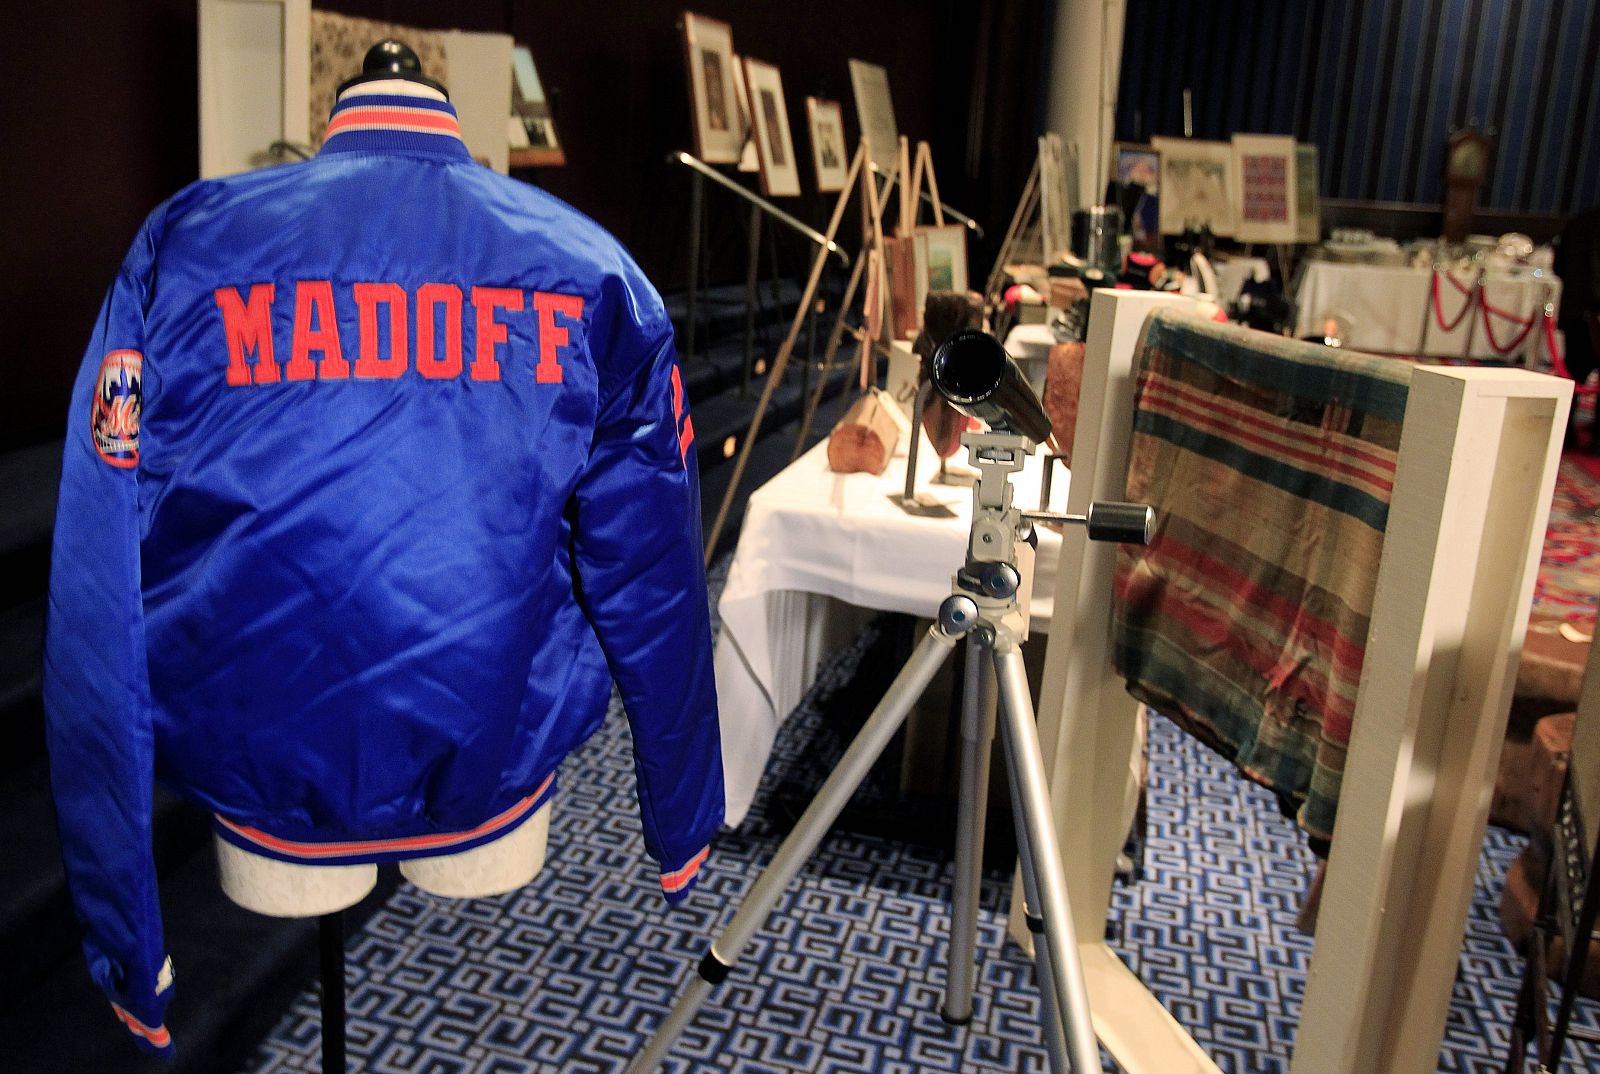 Personal property of Bernard and Ruth Madoff is seen during a press preview of the auction items seized in New York and Florida by the United States Marshals Service in New York